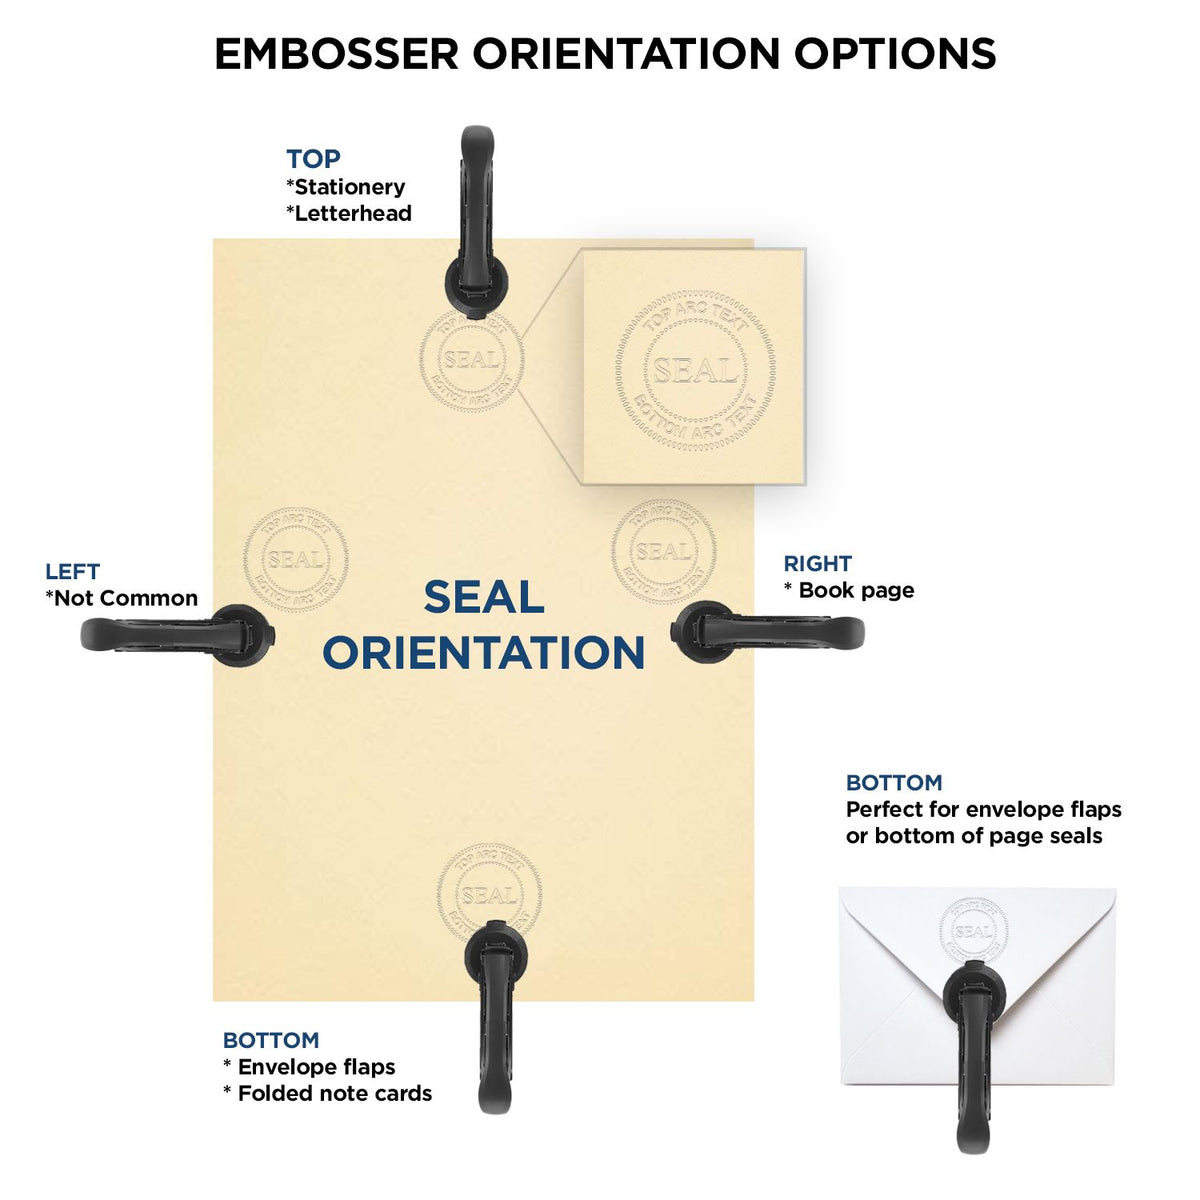 An infographic for the Oregon Geologist Desk Seal showing embosser orientation, this is showing examples of a top, bottom, right and left insert.